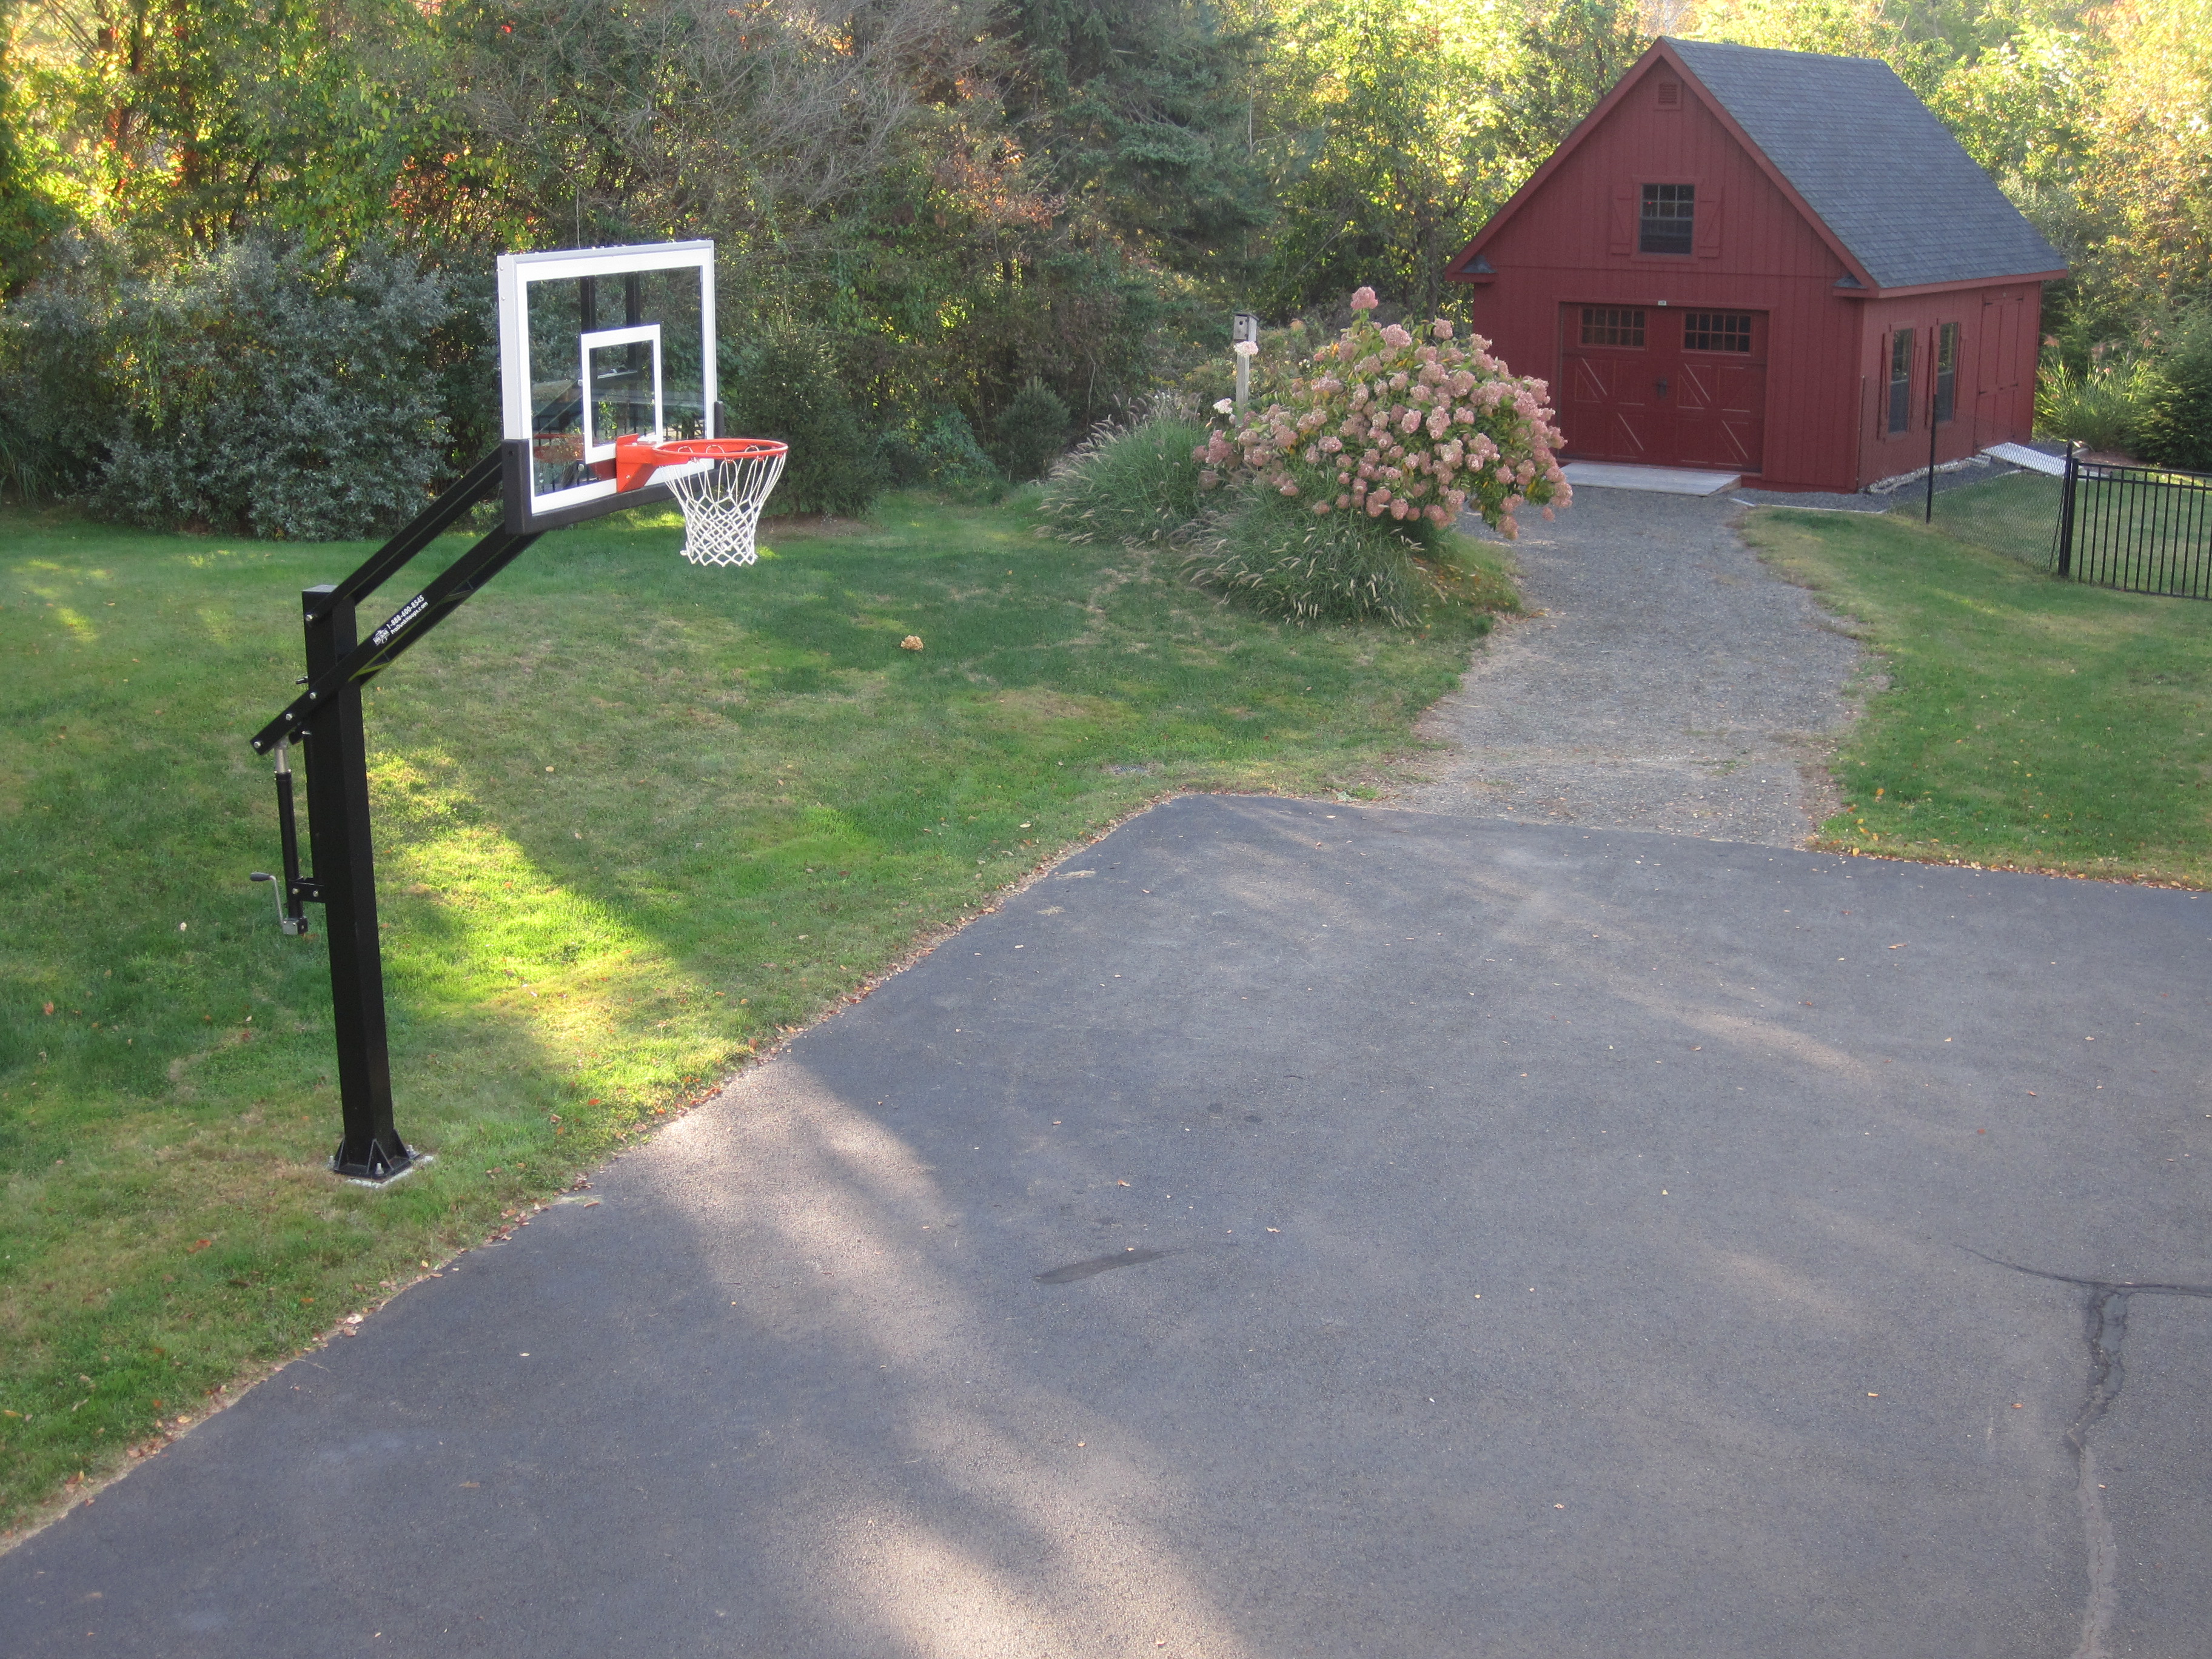 This high angled shot shows this Connecticut family's Pro Dunk Gold Basketball system.